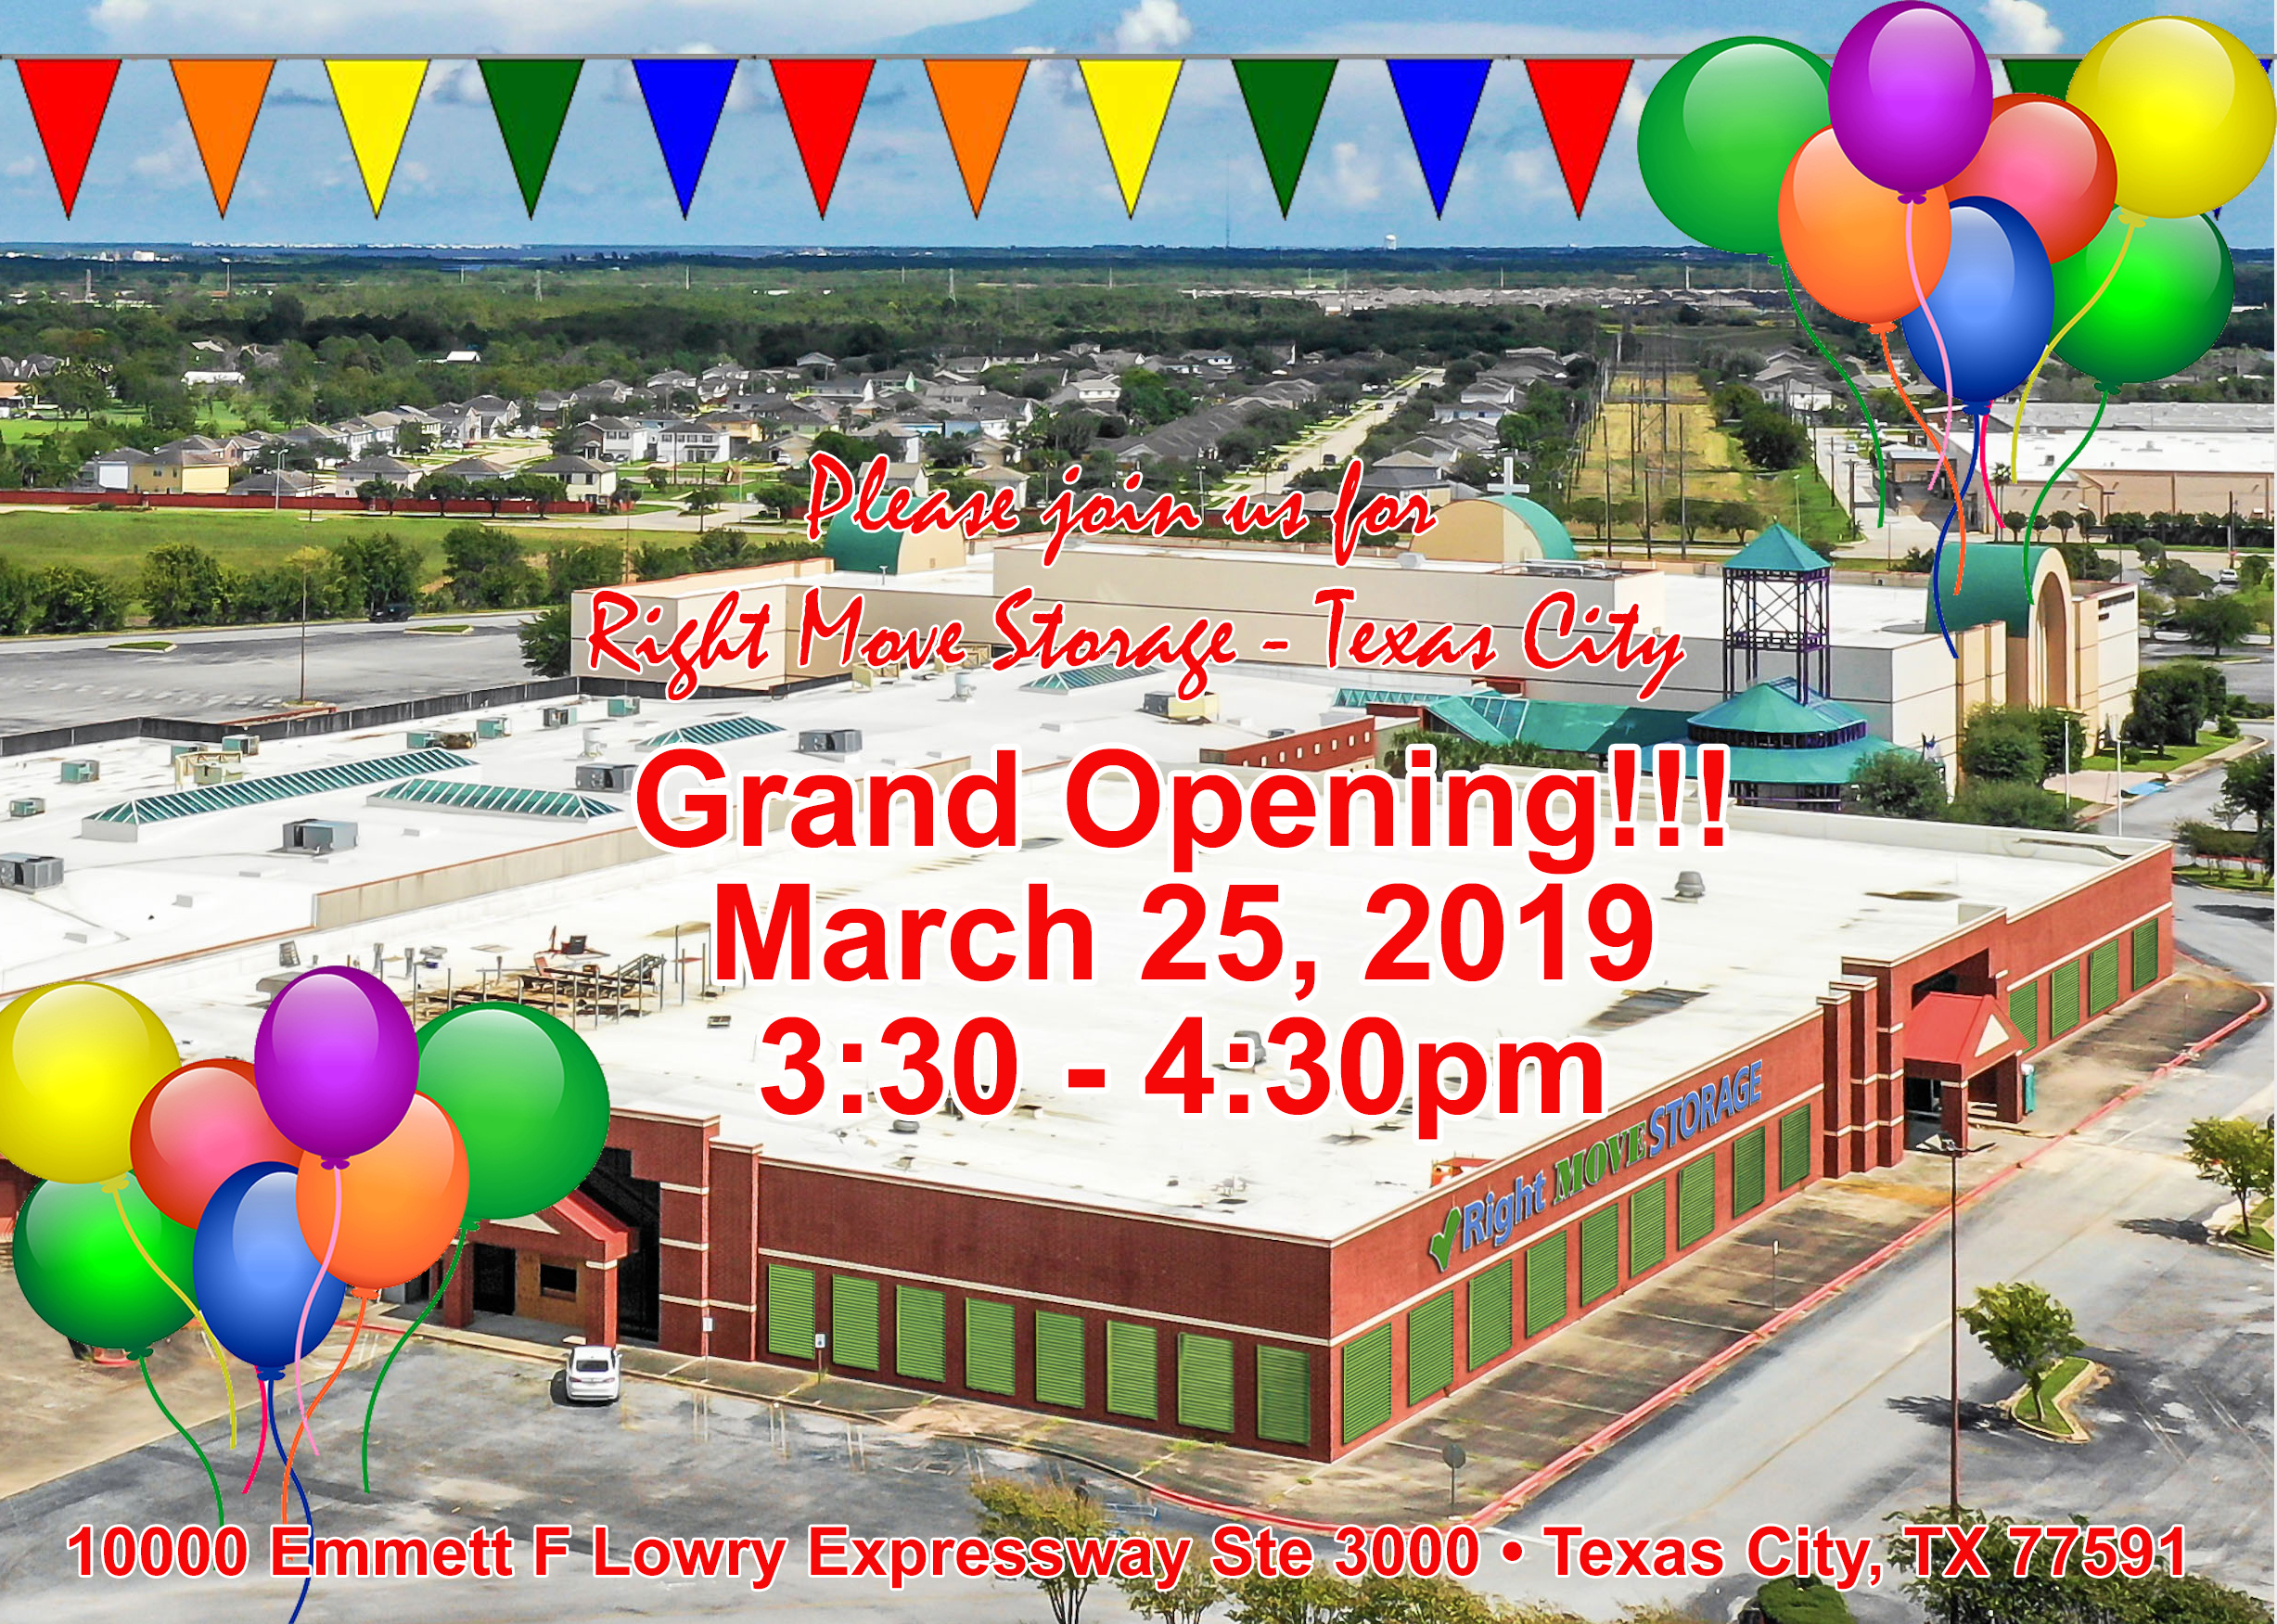 Right Move Storage - Texas City GRAND OPENING!